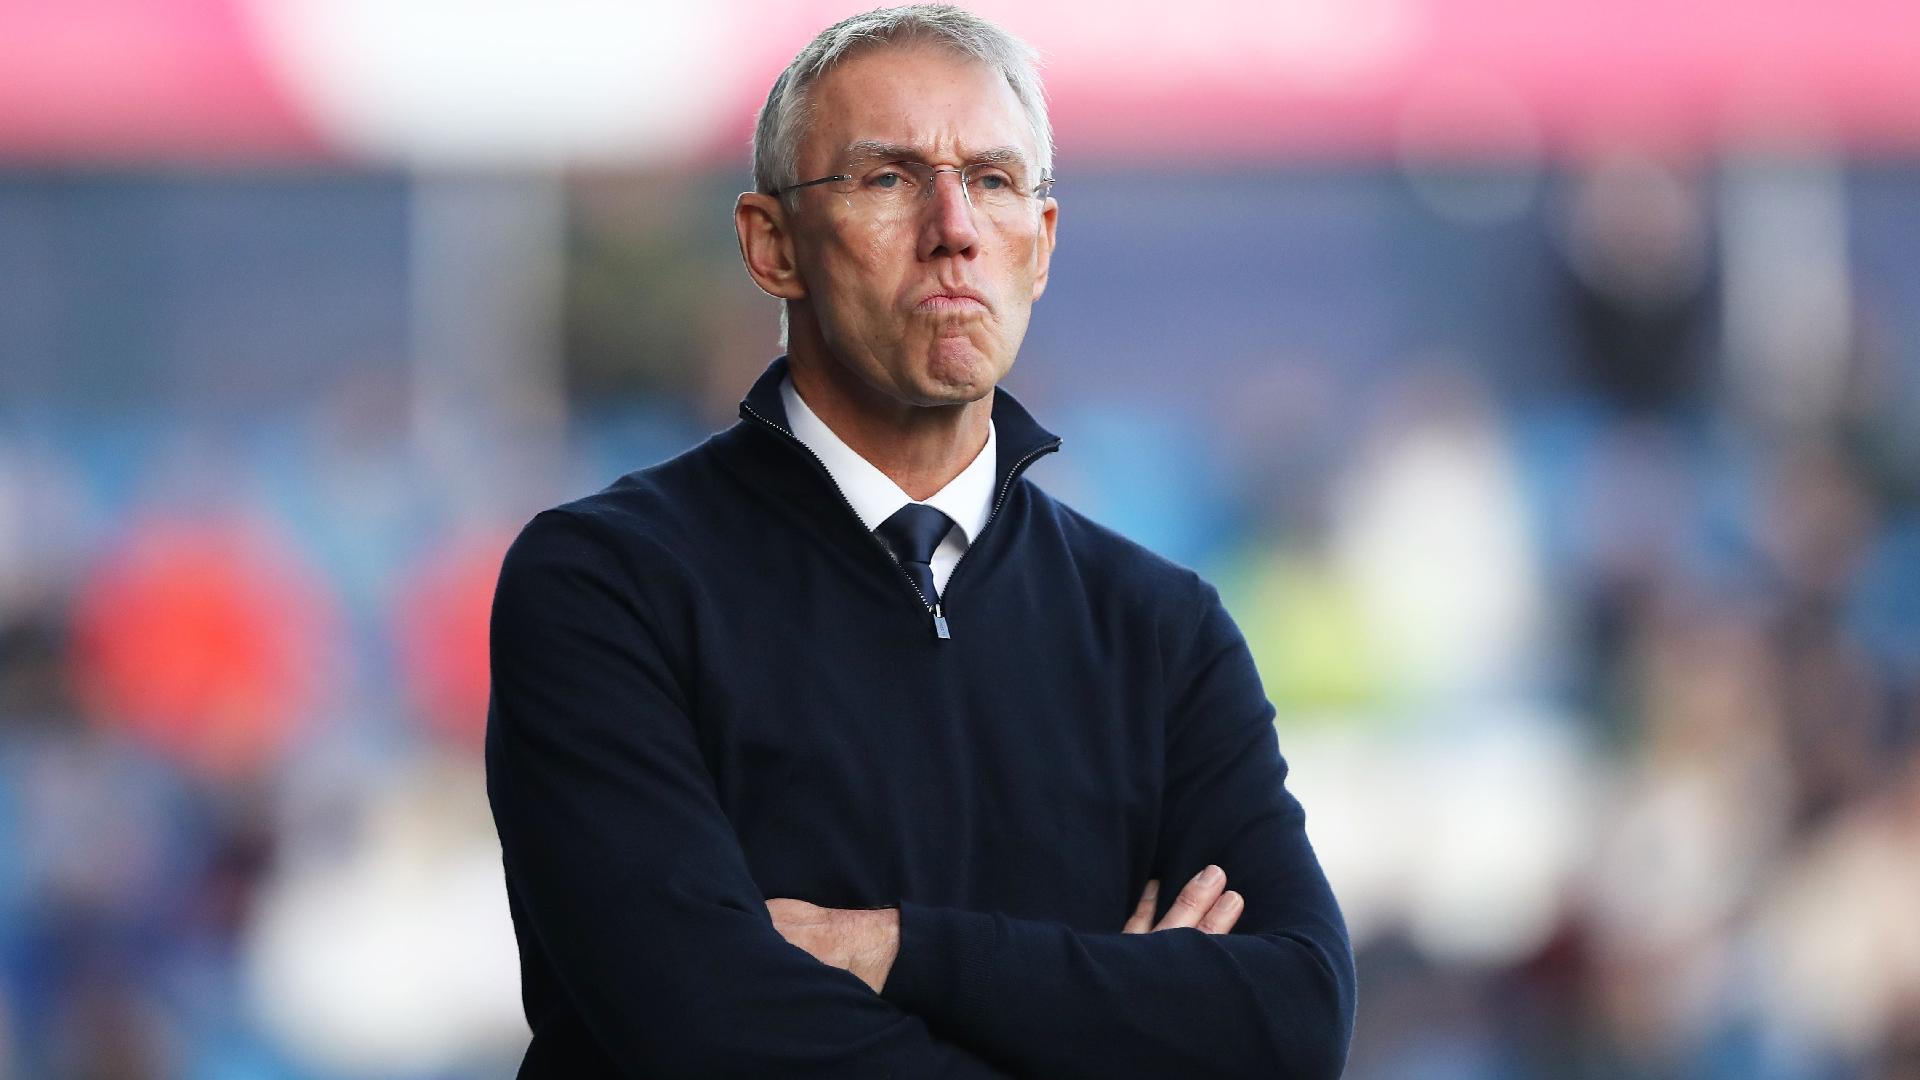 Nigel Adkins knows Tranmere’s win over Sutton was ‘important result’